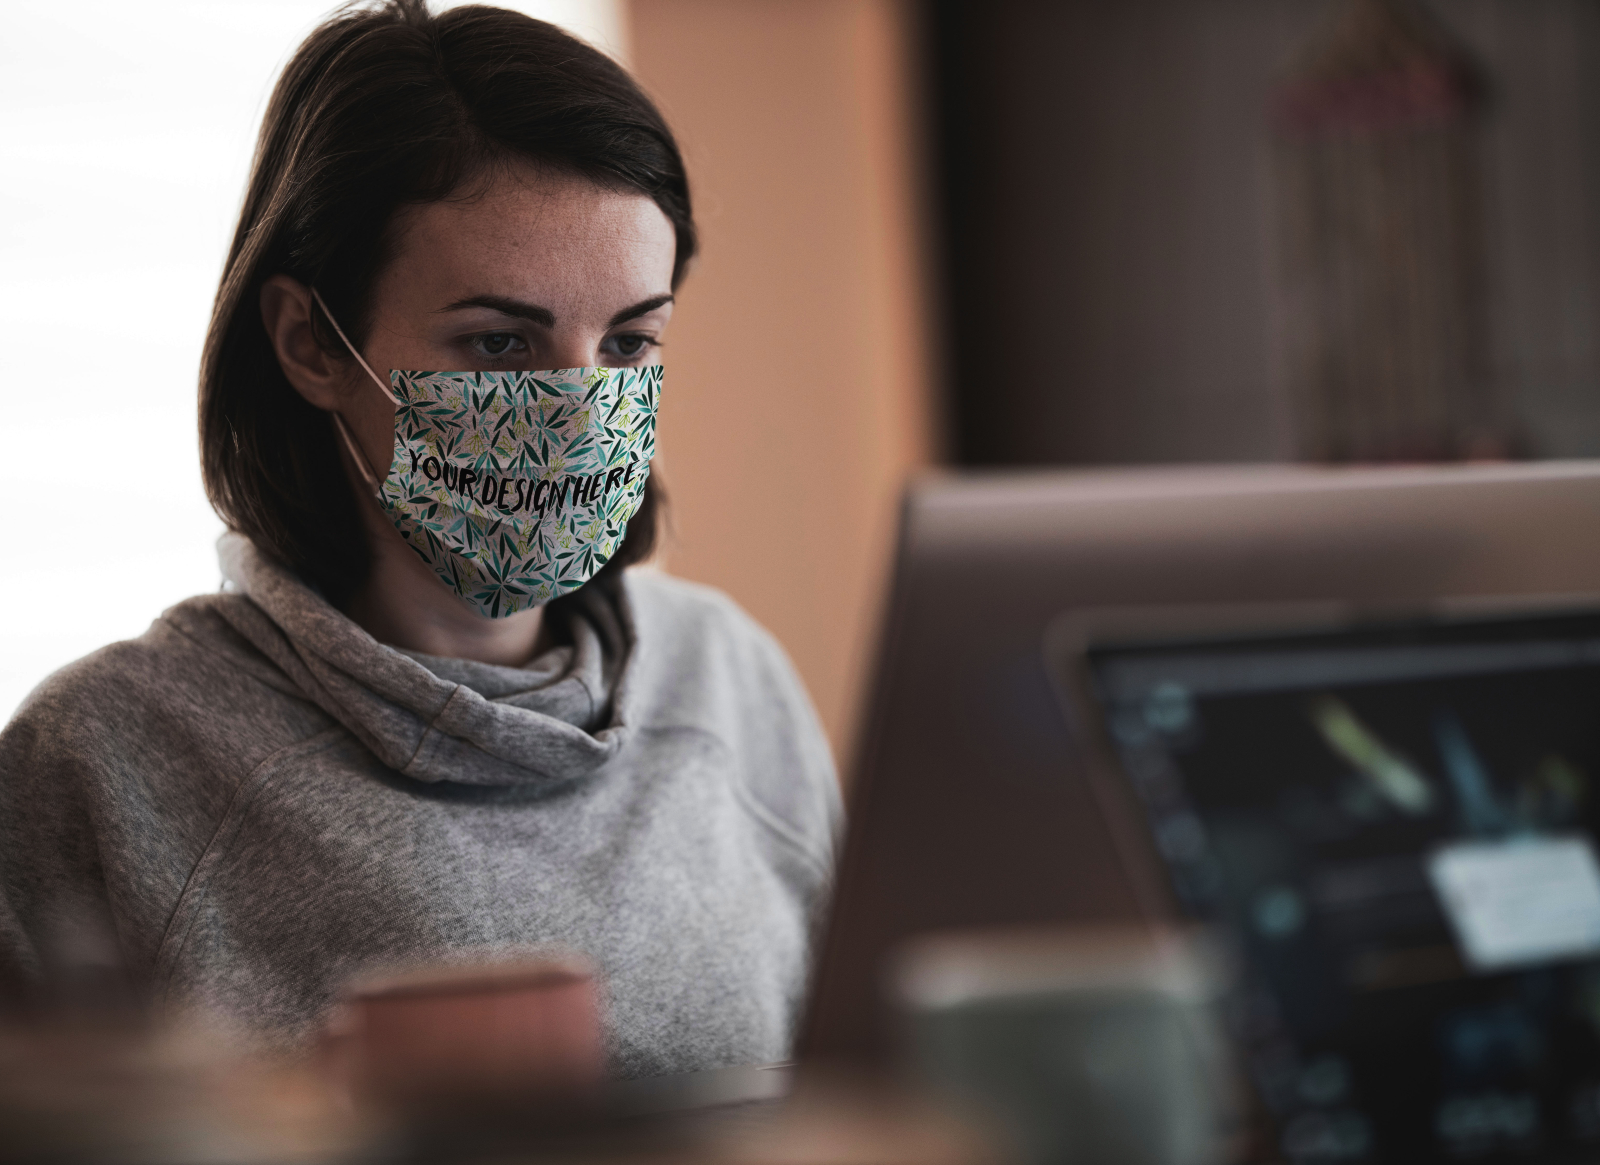 Download Working in Face Mask Mockup Free PSD by Roman Kups on ...